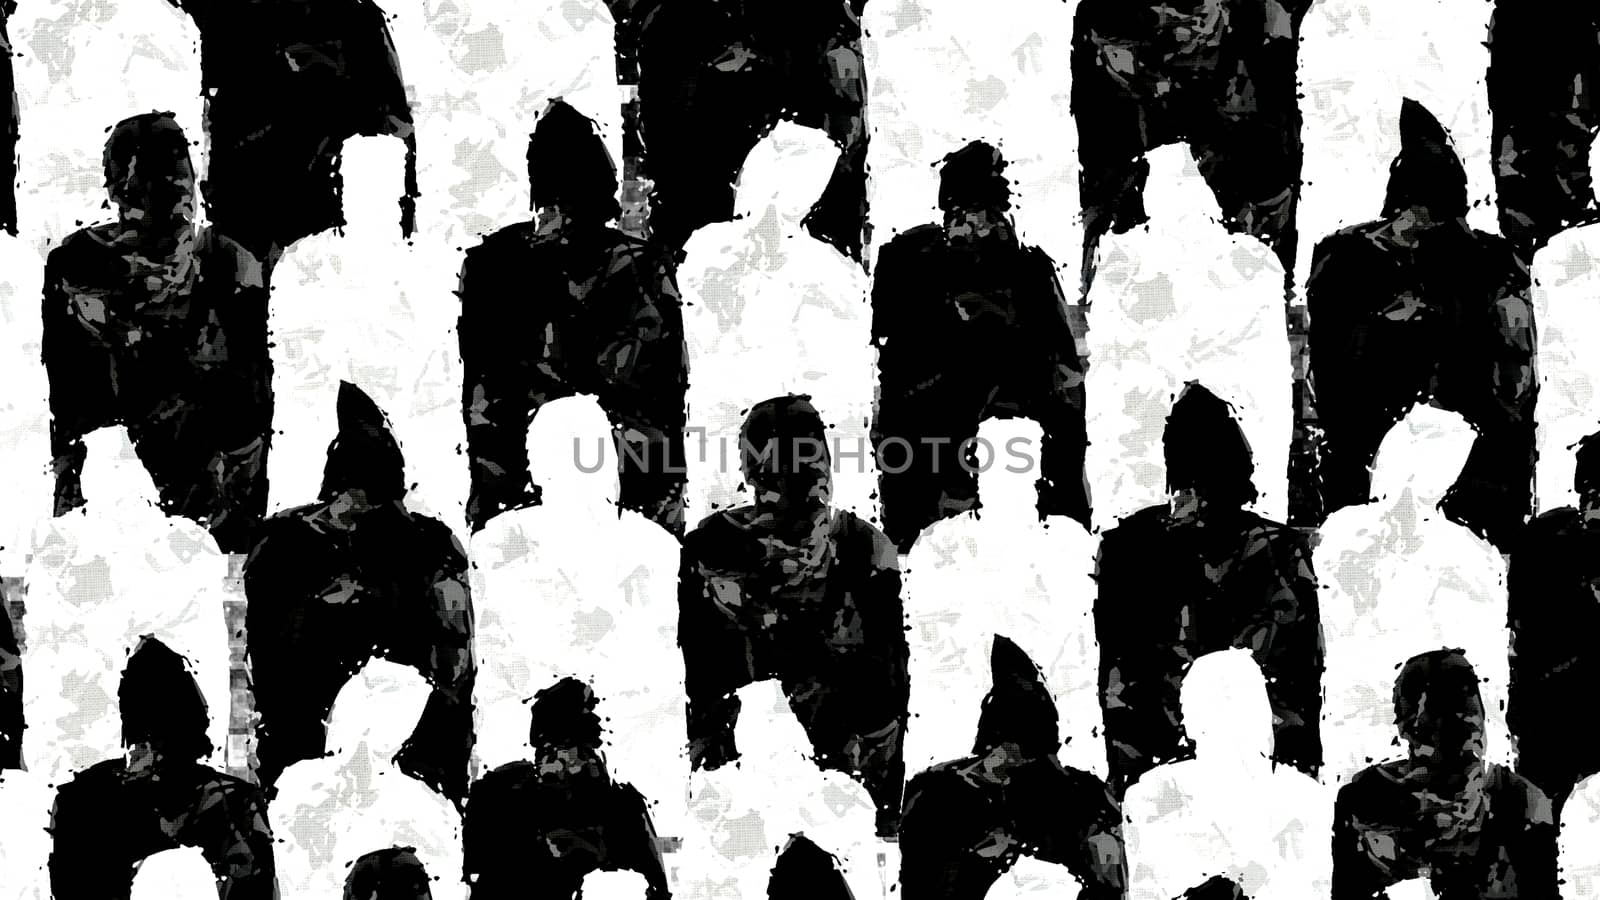 Black and white people silhouettes illustration by klss